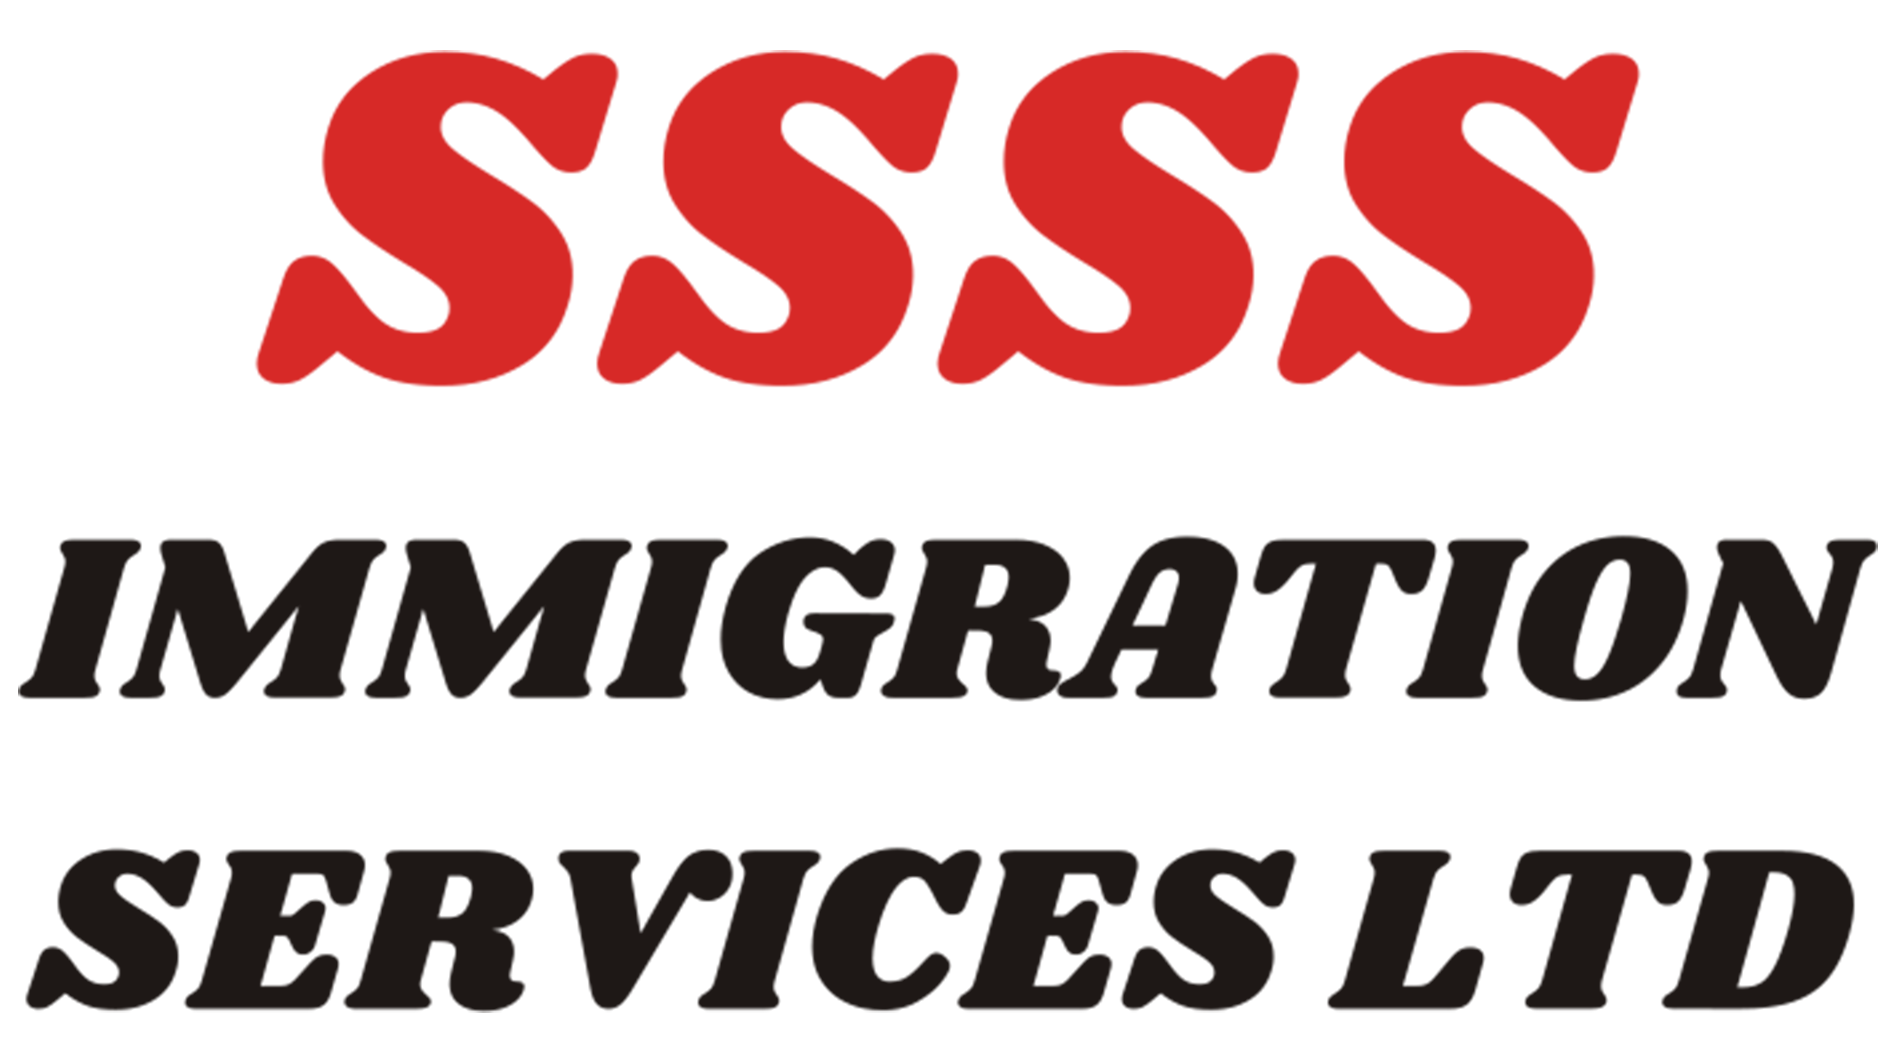 SSSS Immigration Services